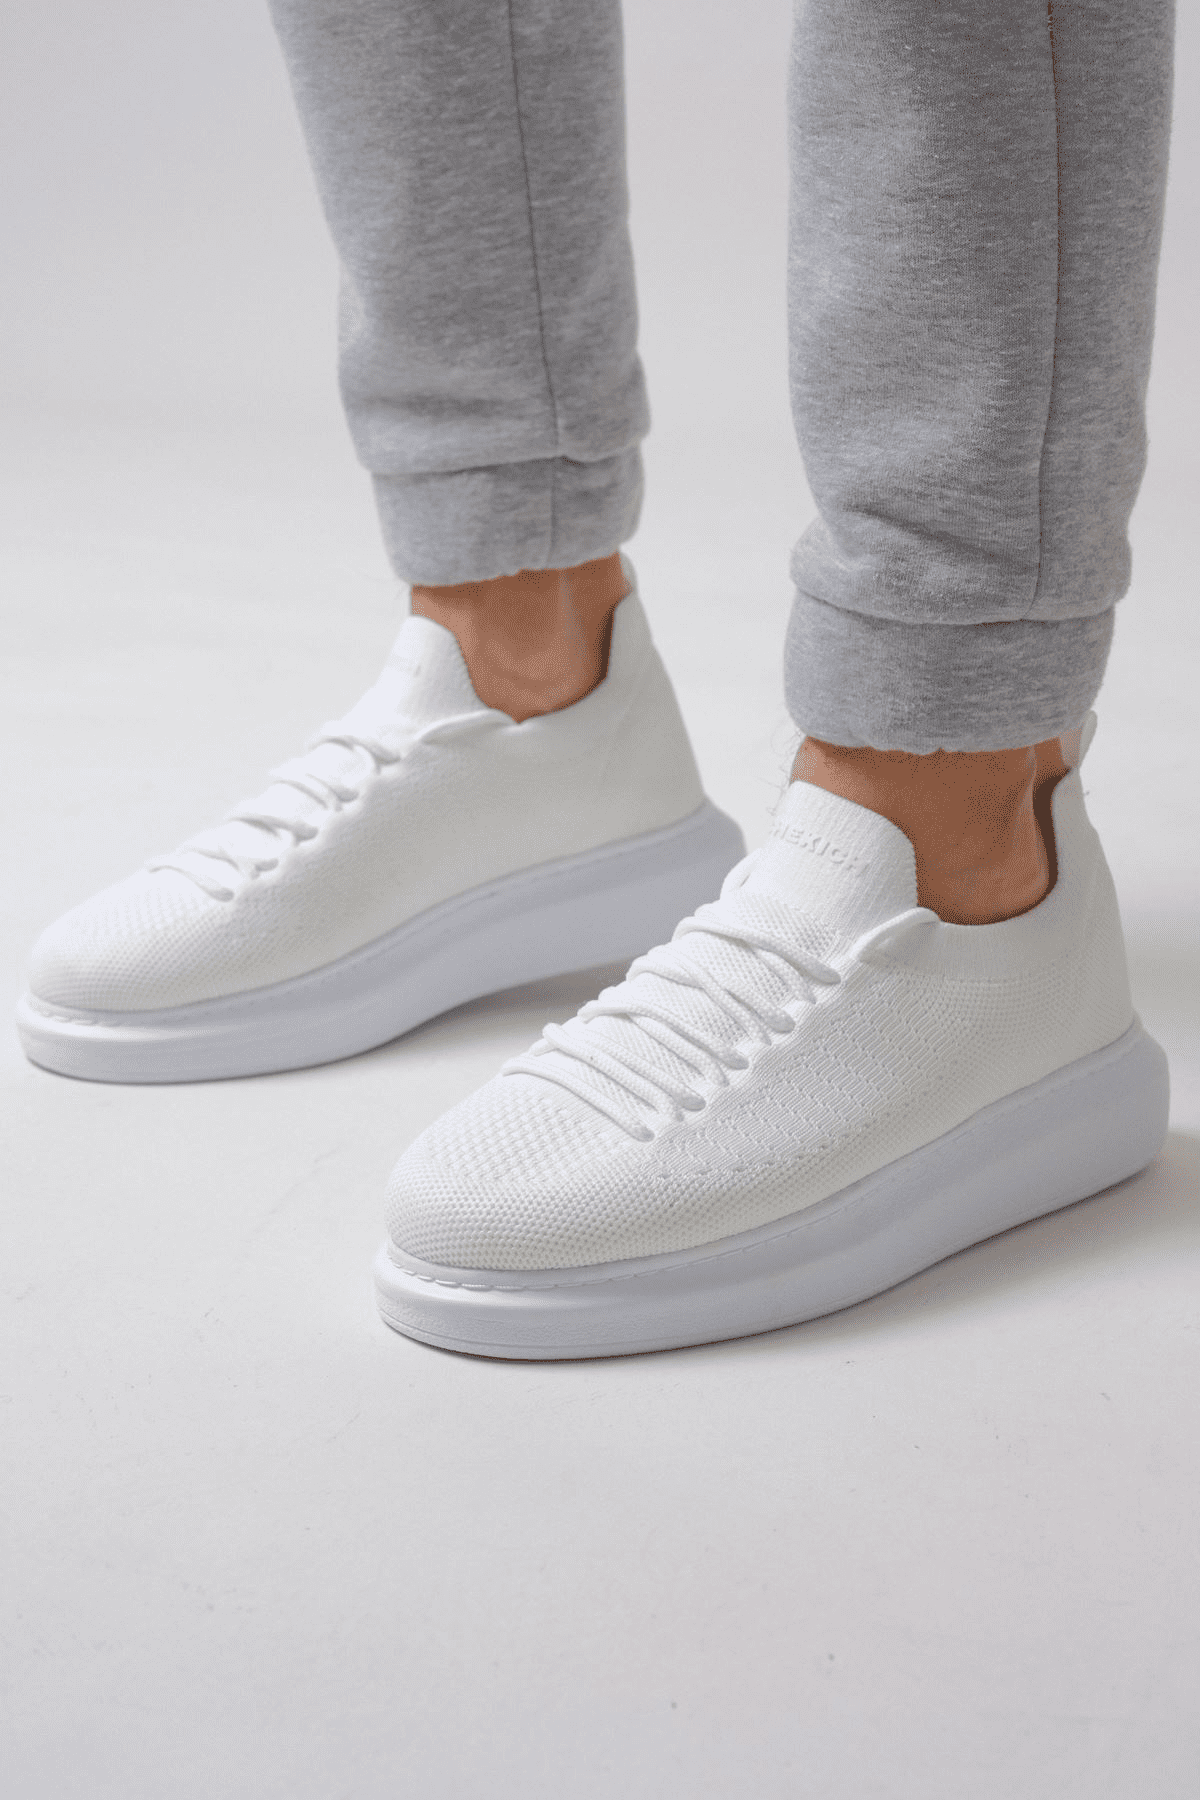 Chekich Men's Shoes White Color Sneakers Knitted Fabric Material Lace-Up Stitched White Sole Breathable Odorless CH307 BT